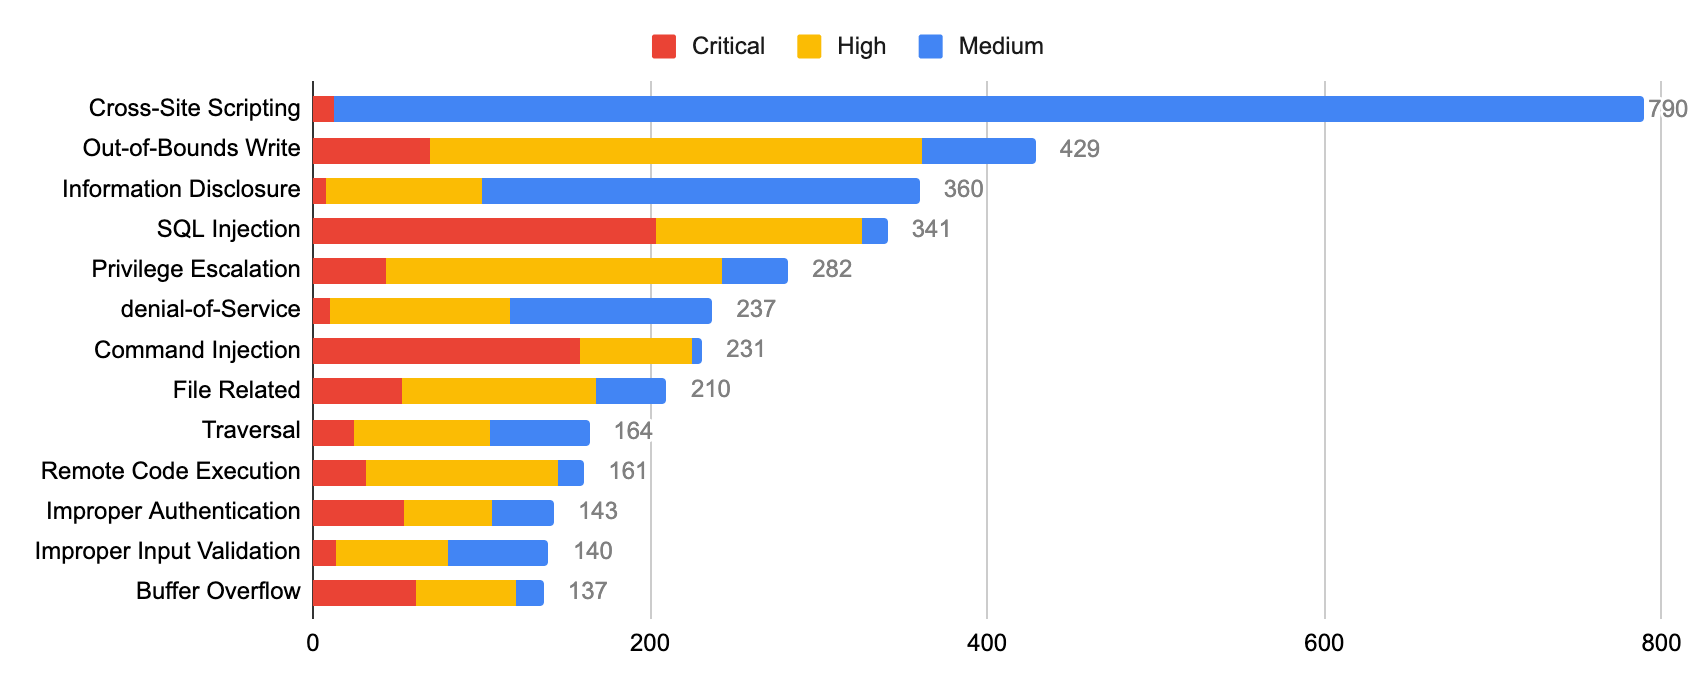 Red = critical, yellow = high, blue = medium. In order from most to least prevalent vulnerability category: cross-site scripting, out-of-bounds write, information disclosure, SQL injection, privilege escalation, denail of service, command injection, file related, traversal, remote code execution, improper authentication, improper input validation, buffer overflow